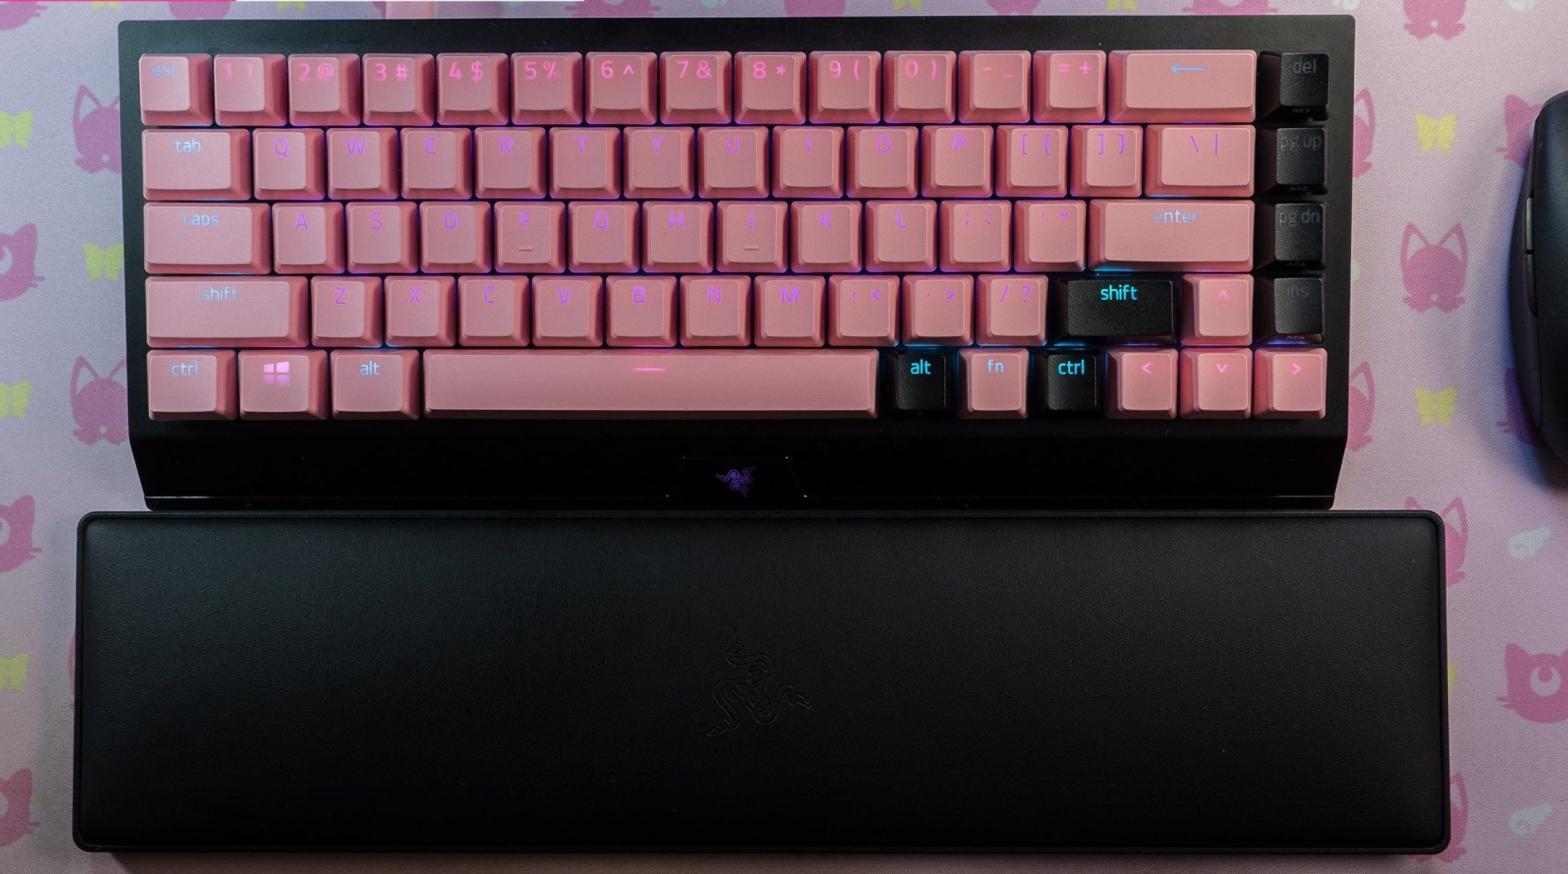 Razer's beginner keyboard upgrade kits are a great way to determine if you enjoy swapping keycaps on the weekends. (Photo: Florence Ion / Gizmodo)